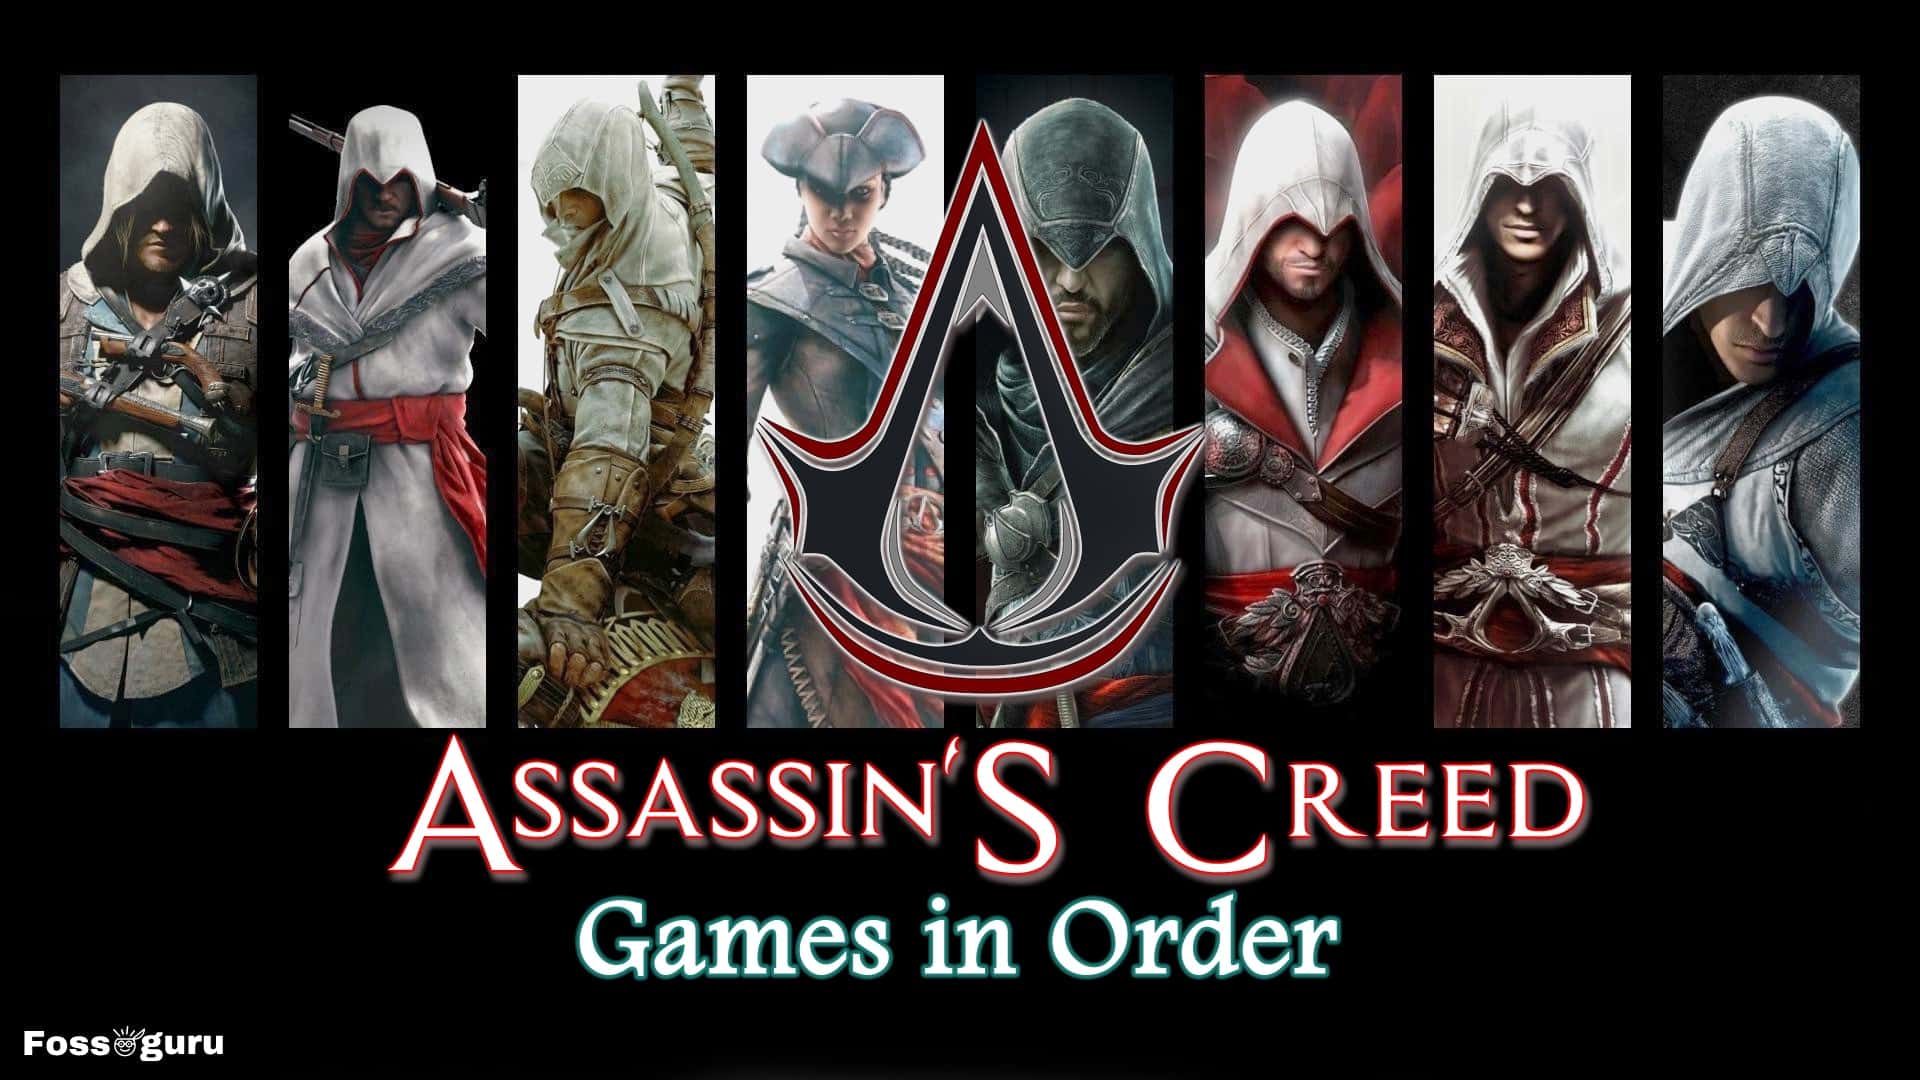 Assassin’s Creed Games in Order